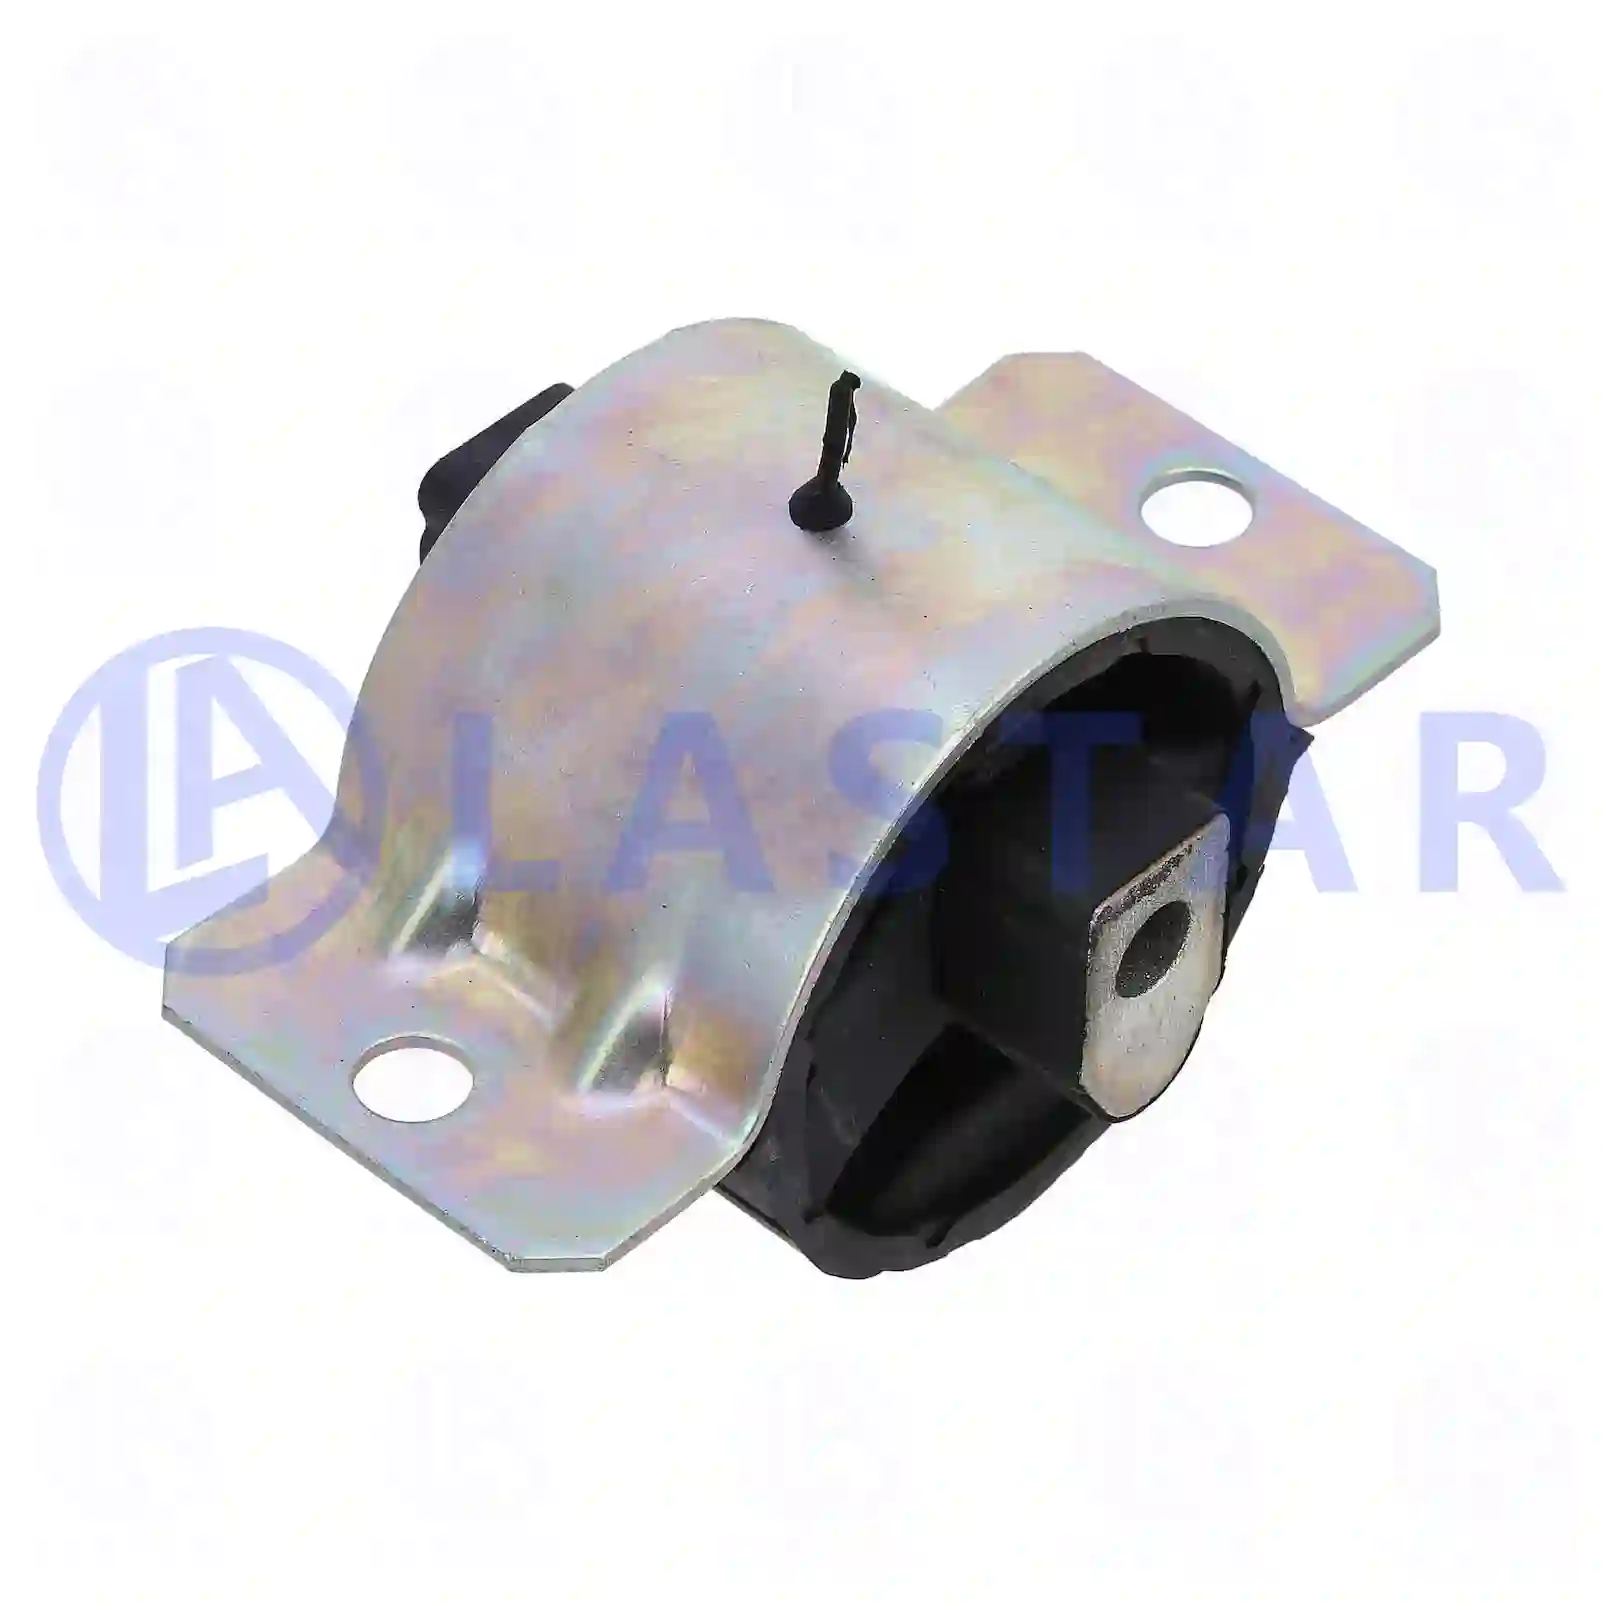 Engine mounting, 77701101, 9012421413, 2D0199379B, 2D0399201 ||  77701101 Lastar Spare Part | Truck Spare Parts, Auotomotive Spare Parts Engine mounting, 77701101, 9012421413, 2D0199379B, 2D0399201 ||  77701101 Lastar Spare Part | Truck Spare Parts, Auotomotive Spare Parts